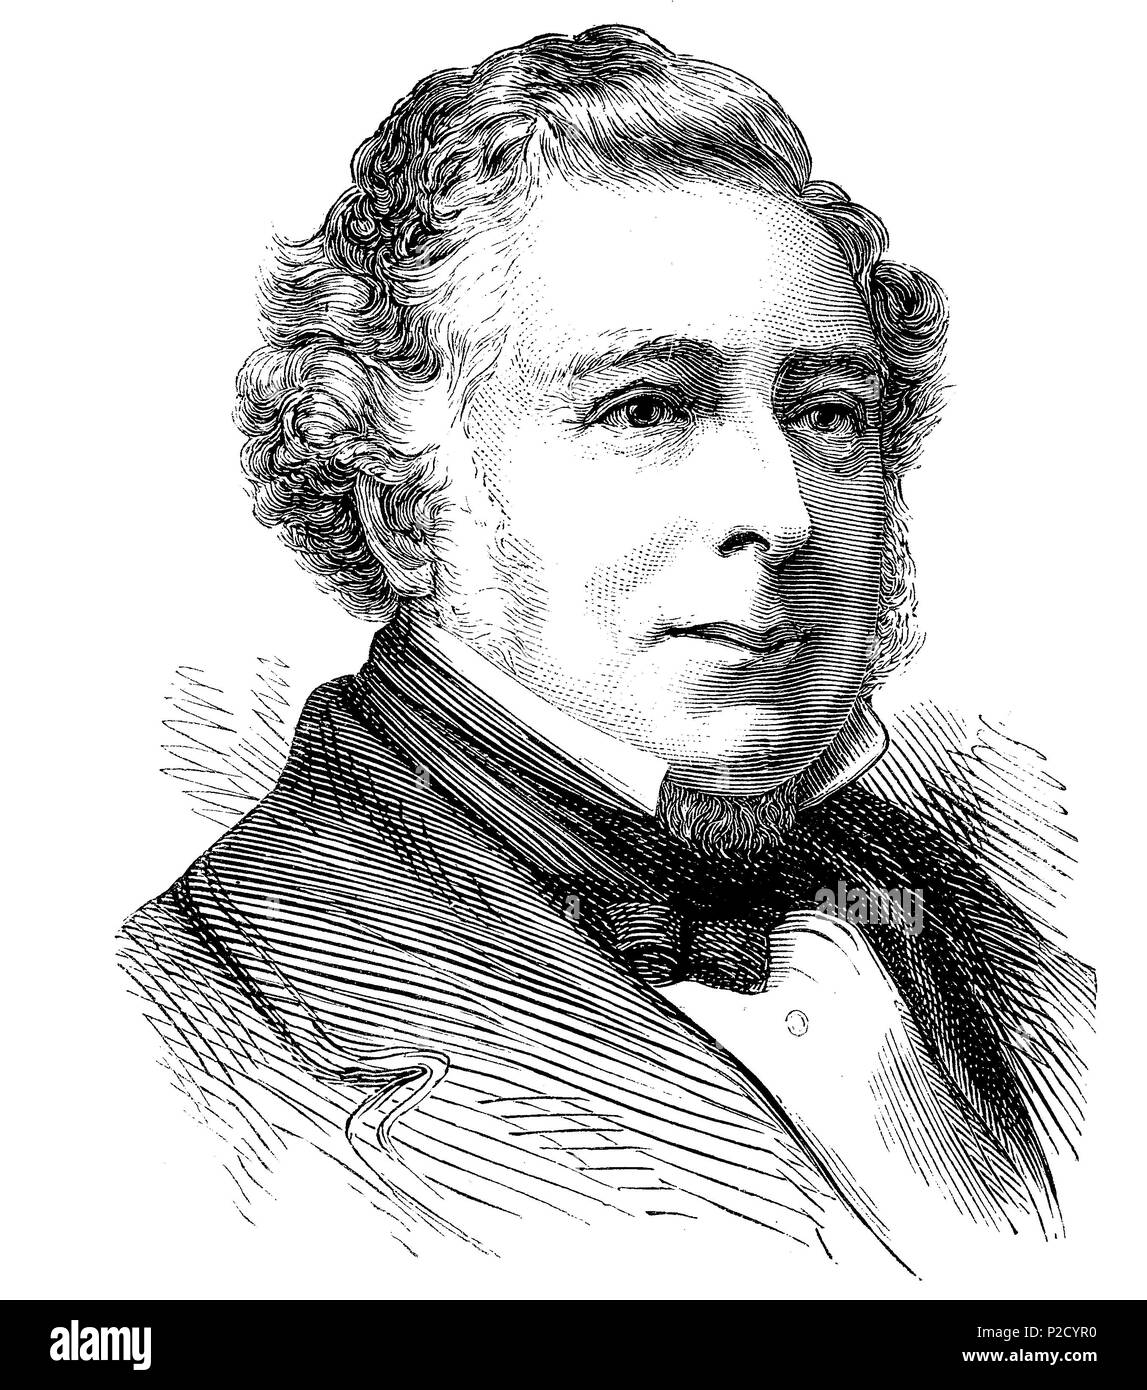 Robert Stephenson FRS, 1803 – 1859, was an early railway and civil engineer, digital improved reproduction from an original print from the 19th century, 1881 Stock Photo